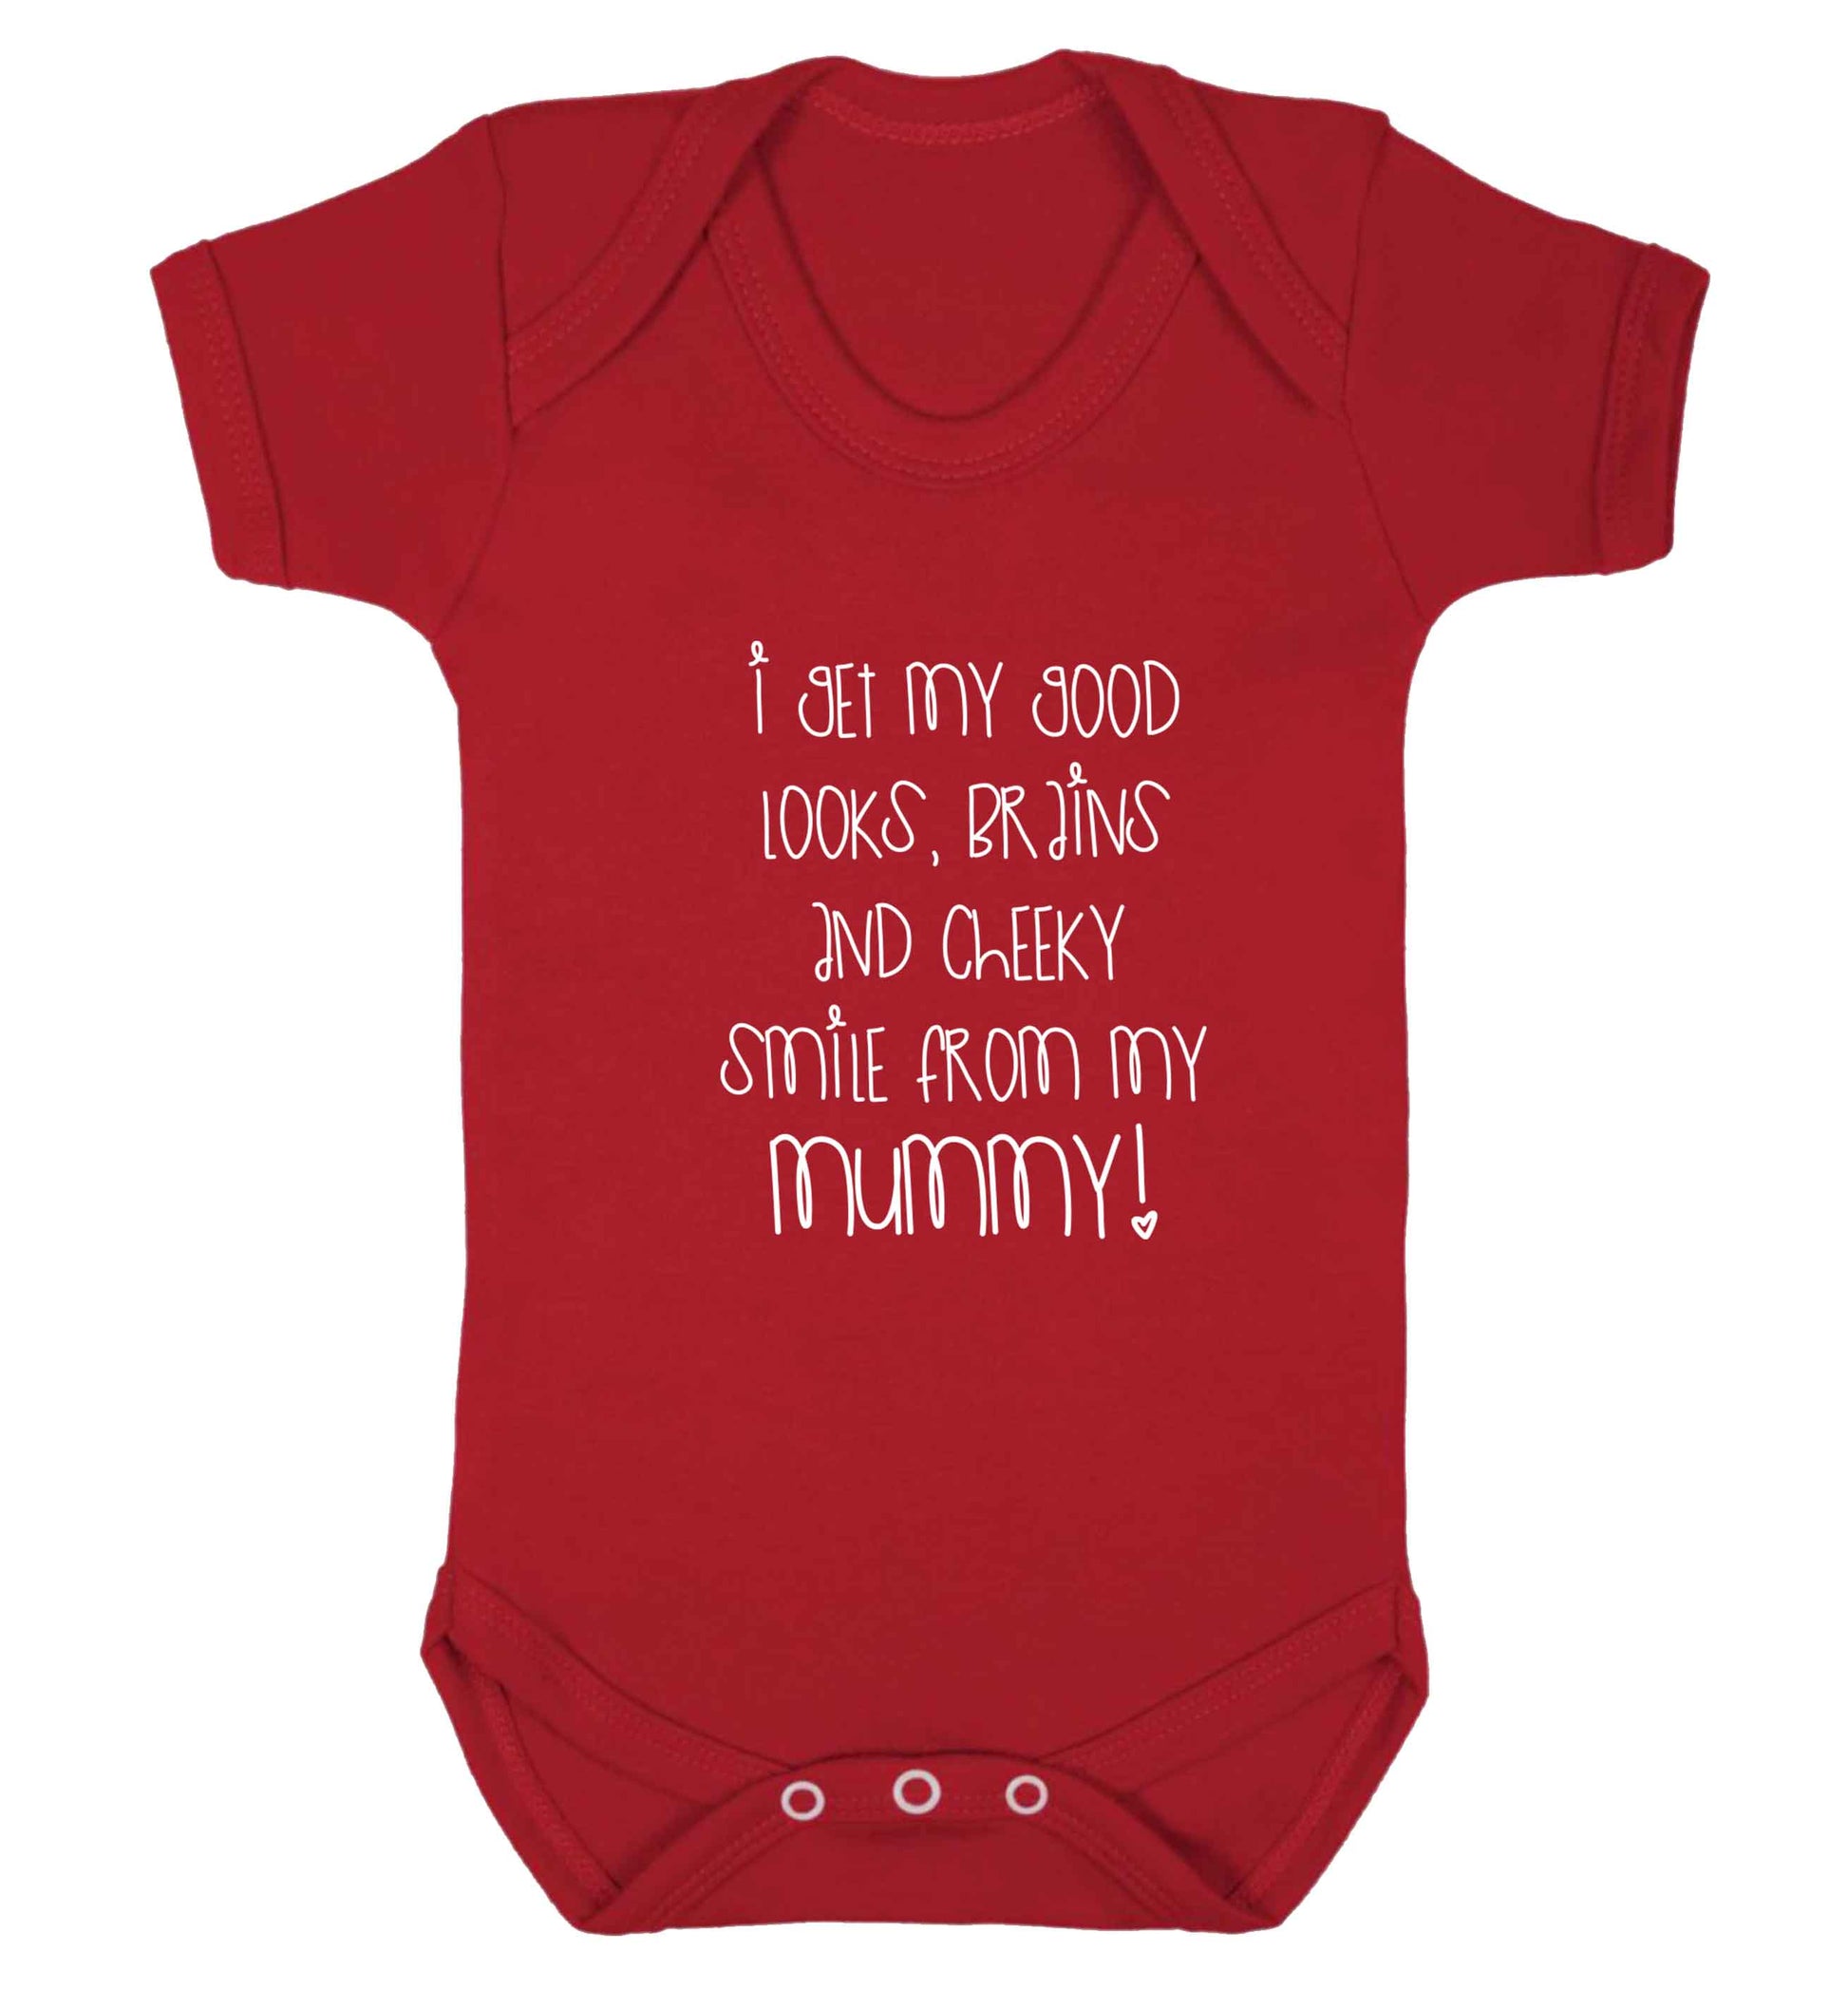 I get my good looks, brains and cheeky smile from my mummy baby vest red 18-24 months